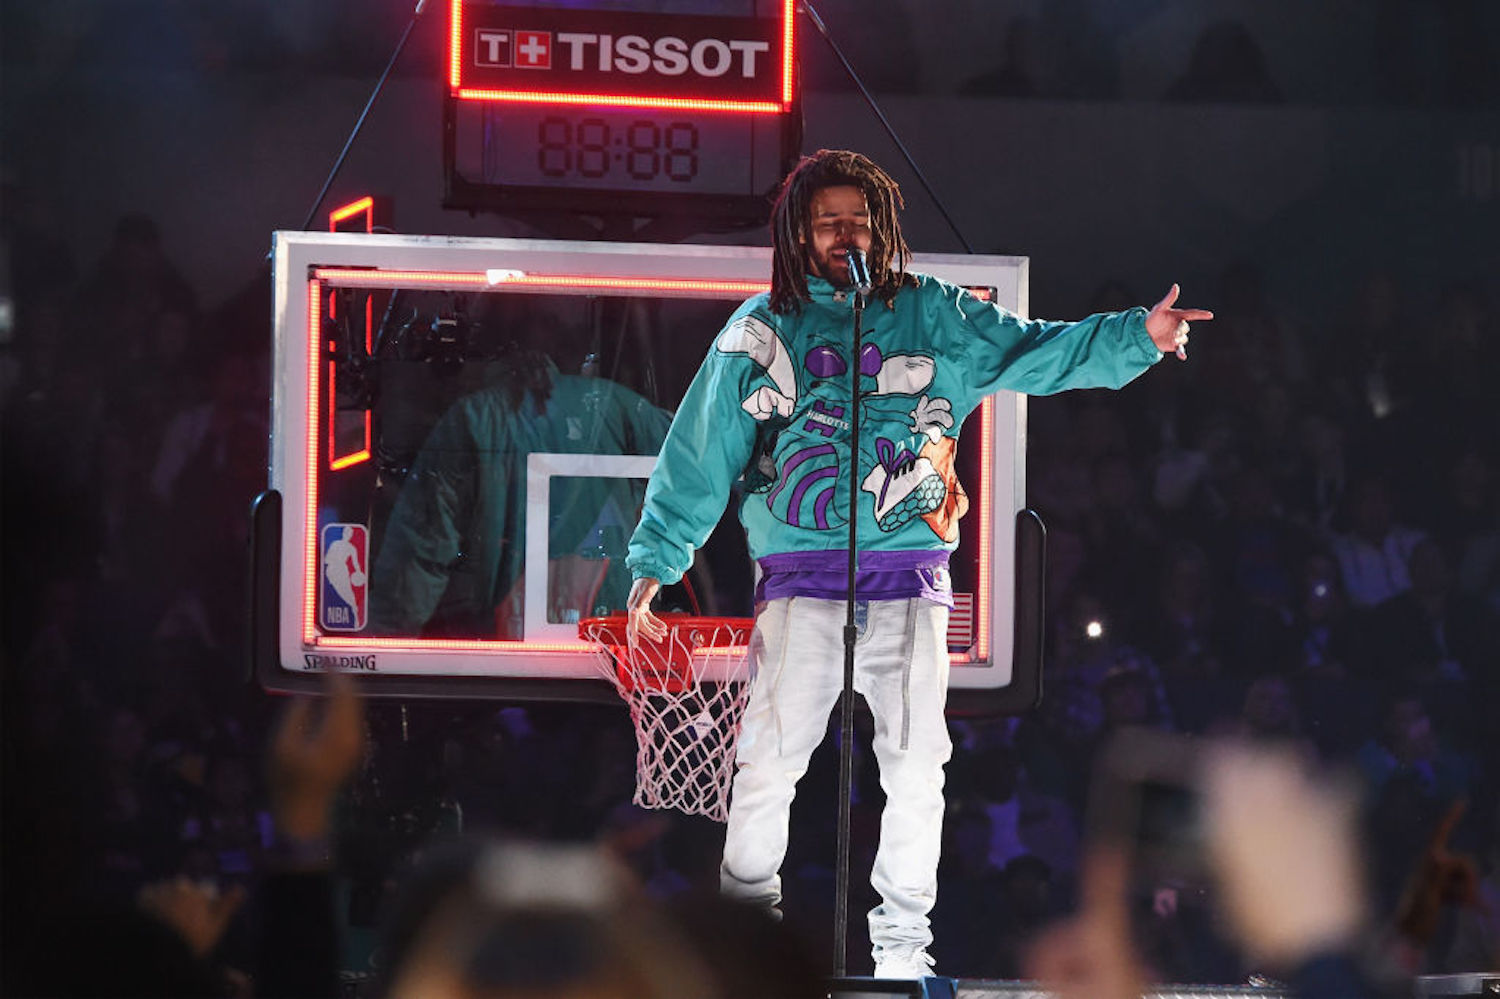 Rapper J. Cole has expressed interest in trying out for an NBA team, and the Detroit Pistons have taken him up on the offer.